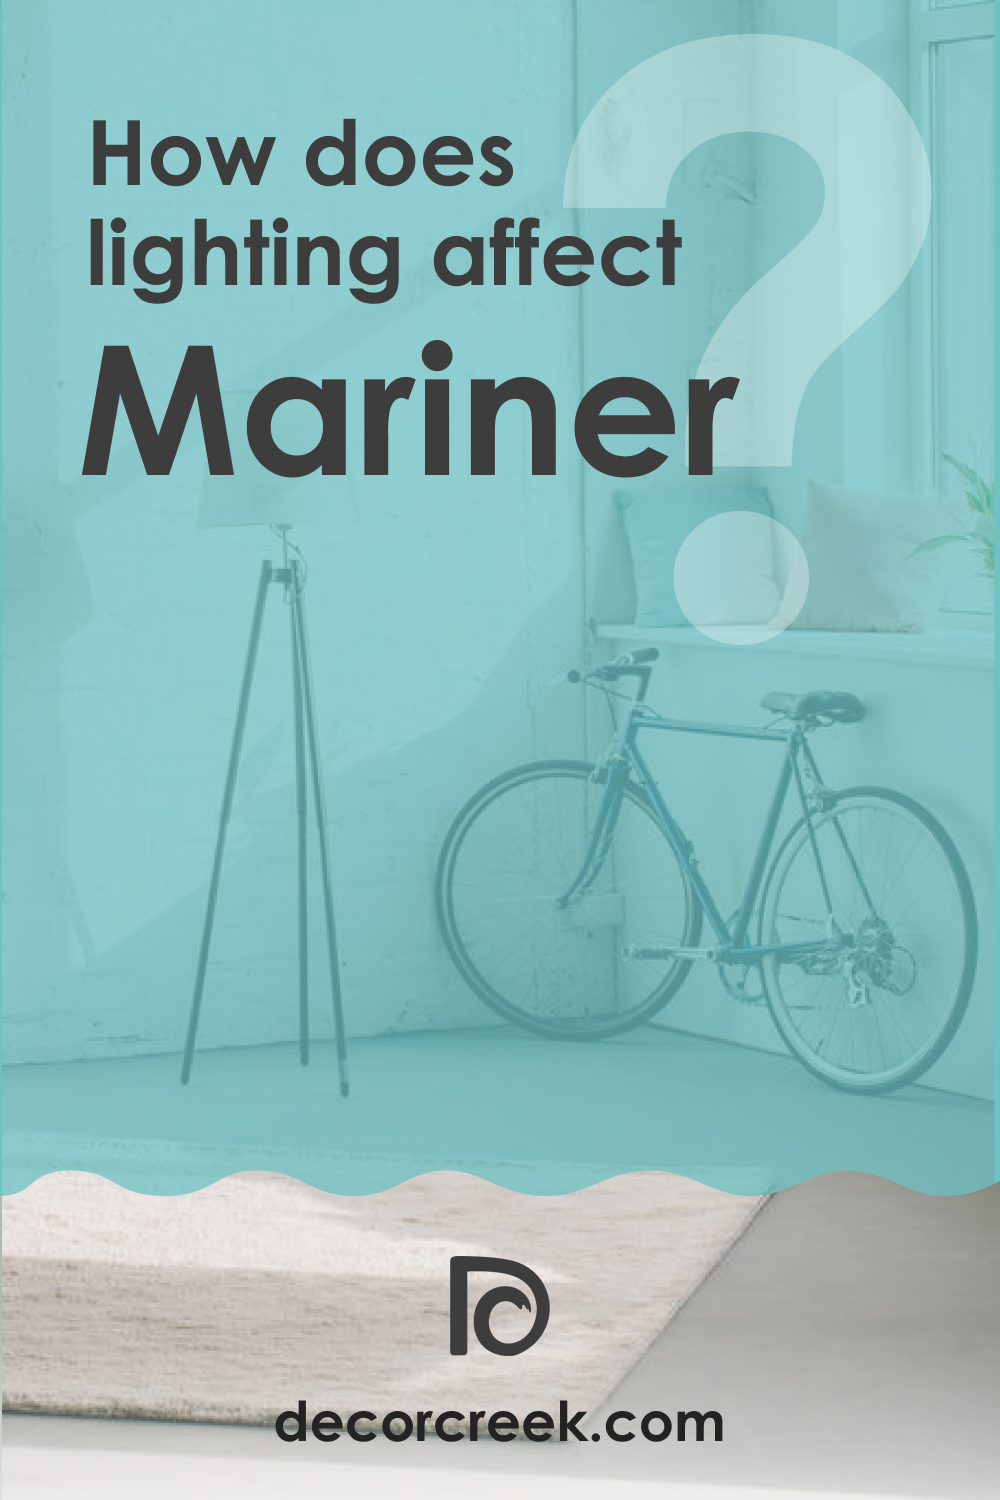 How Does Lighting Affect SW 6766 Mariner?